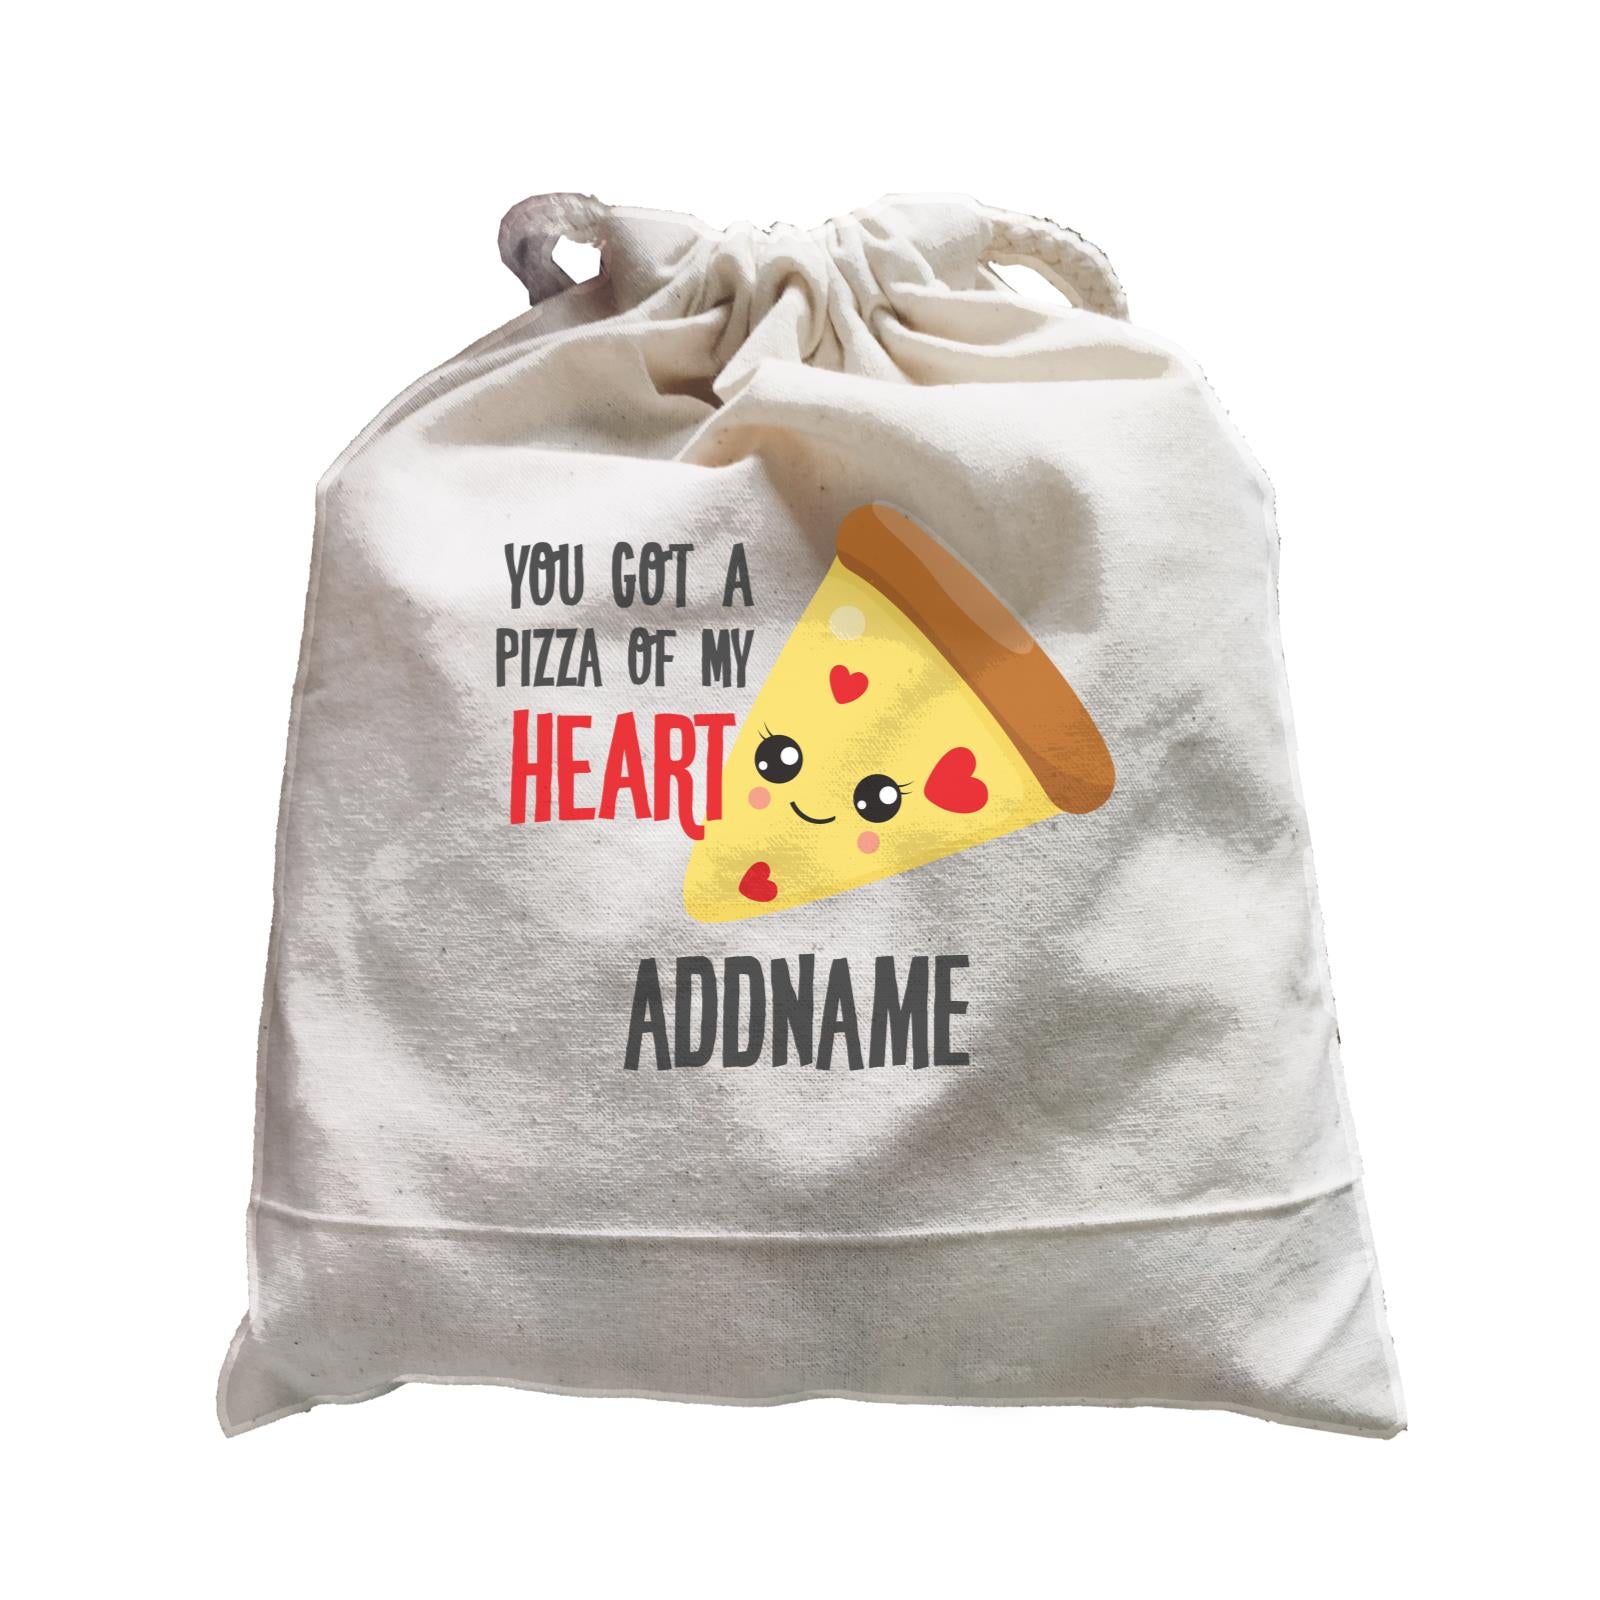 Love Food Puns You Got A Pizza Of My Heart Addname Satchel